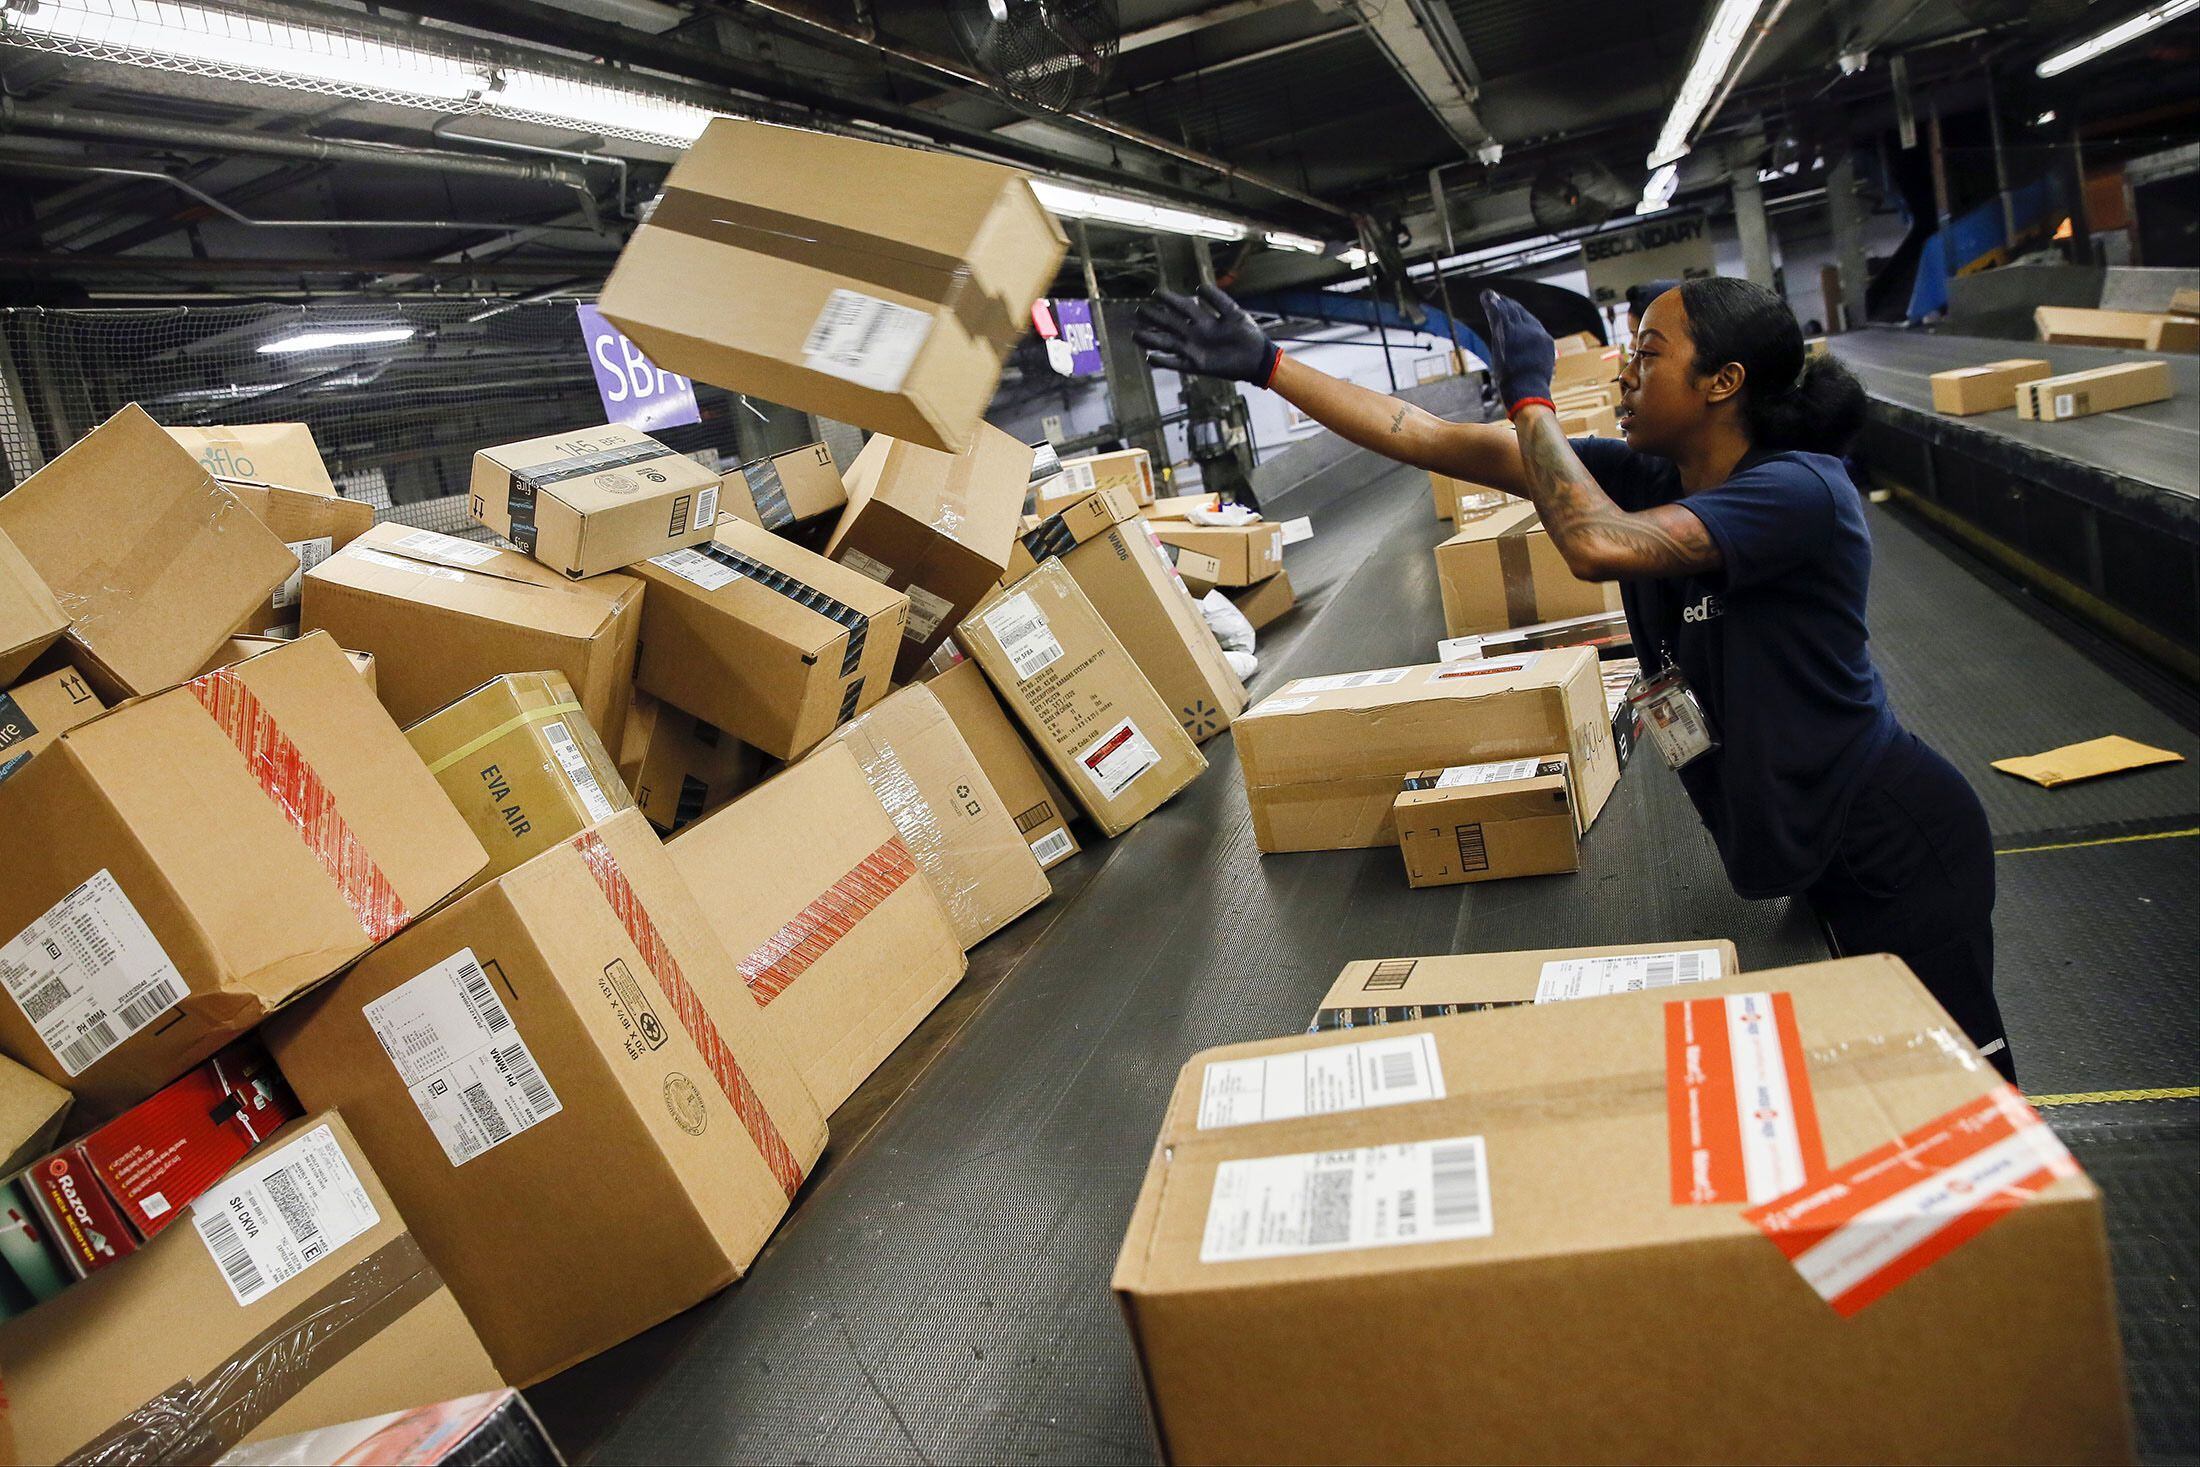 An employee sorts packages inside the FedEx Corp. distribution hub at Los Angeles International Airport on Dec. 15, 2014. MUST CREDIT: Bloomberg photo by Patrick T. Fallon.